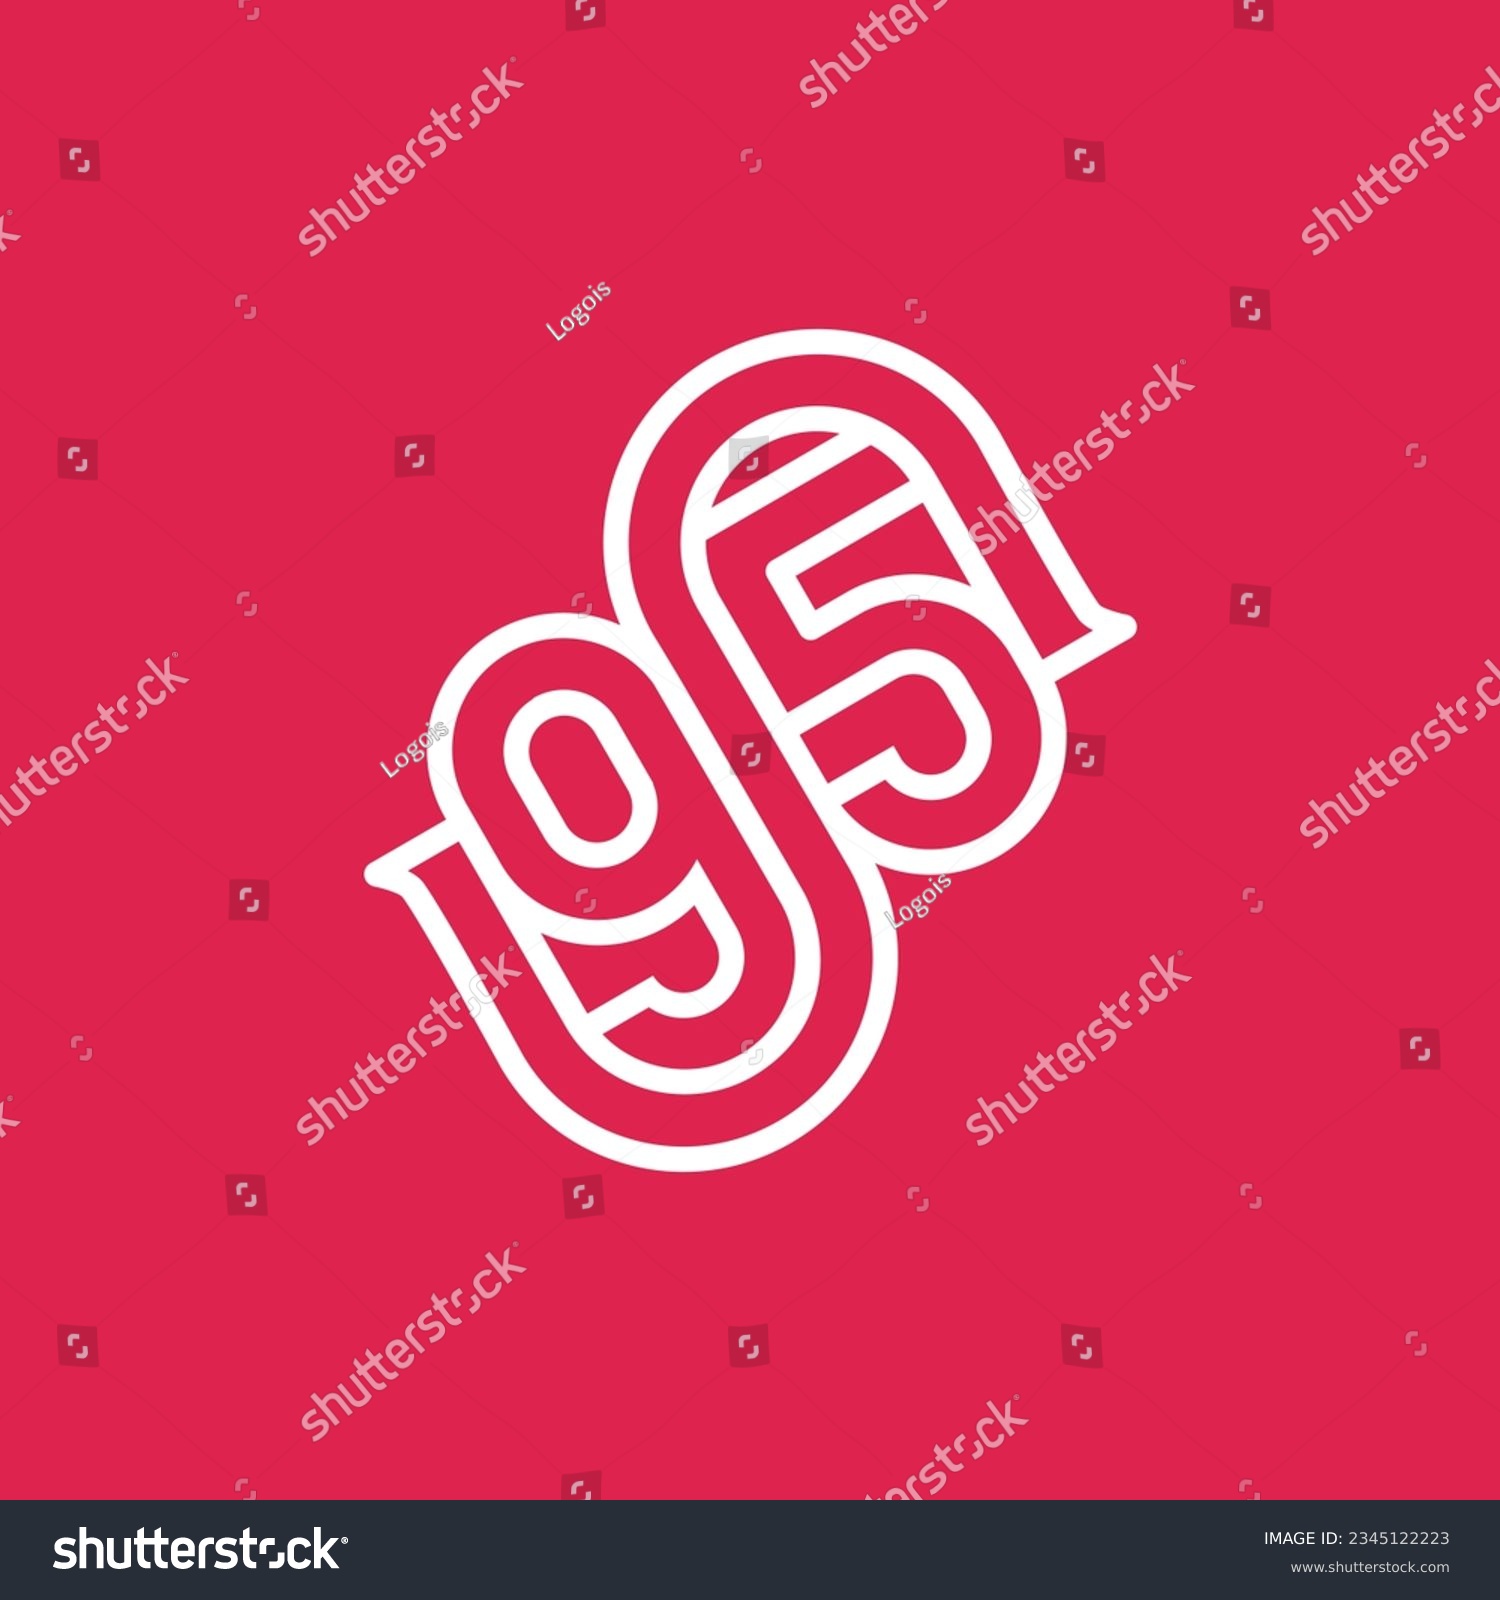 SVG of the logo consists of the letter S and number 95 combined. Outline and elegant. svg